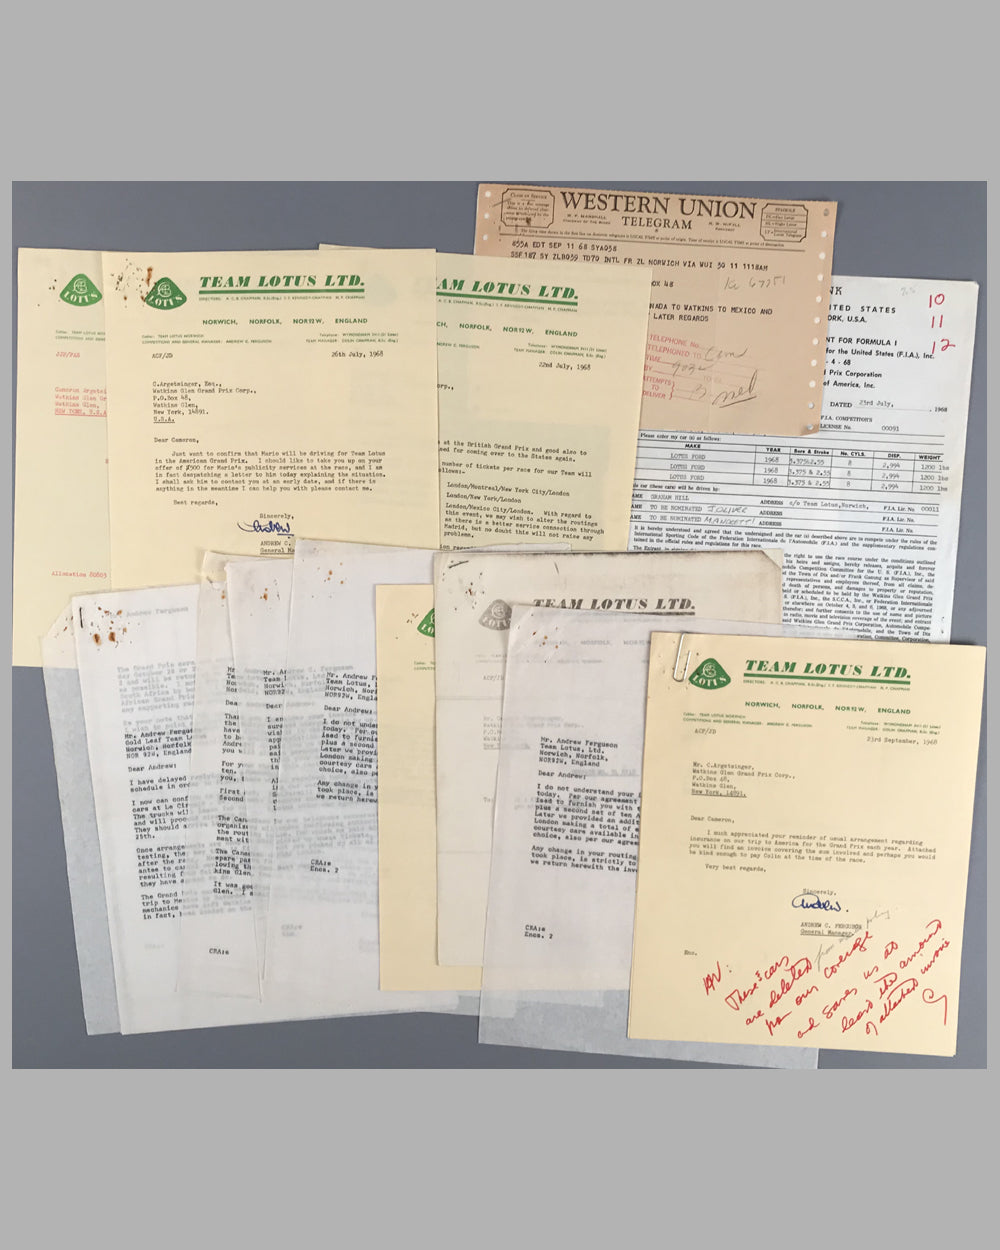 Collection of letters, telegram, entry forms, and invoices